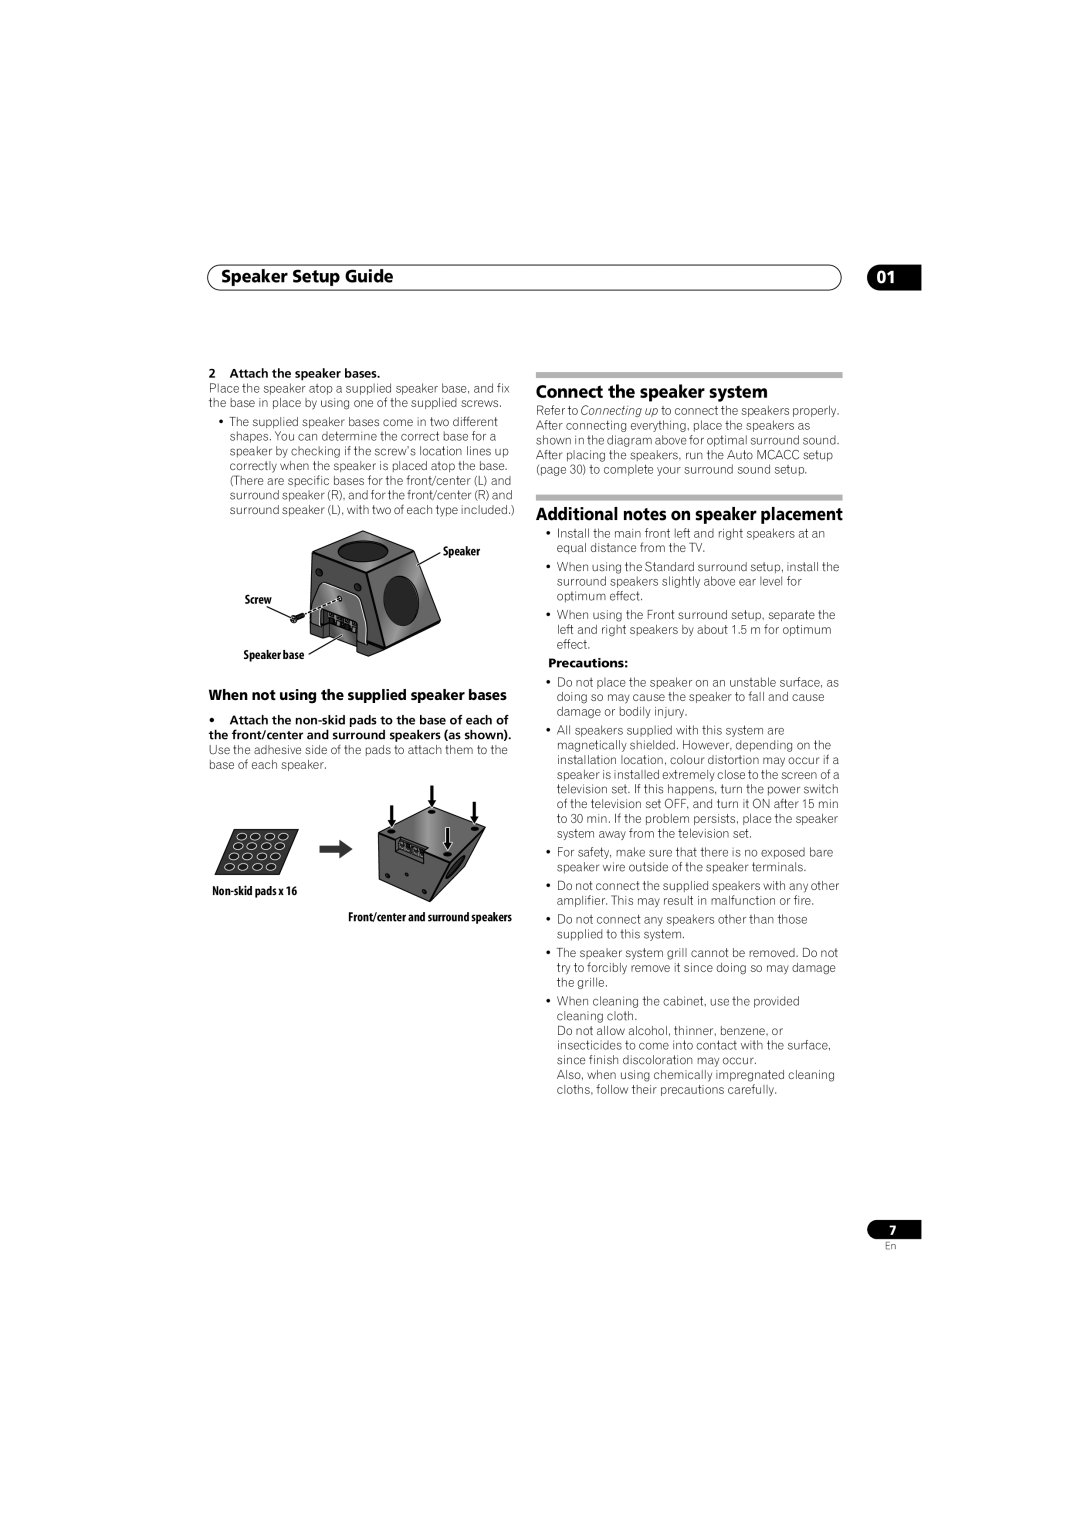 Pioneer SX-LX70SW Speaker Setup Guide, Connect the speaker system, Additional notes on speaker placement, Non-skidpads x 